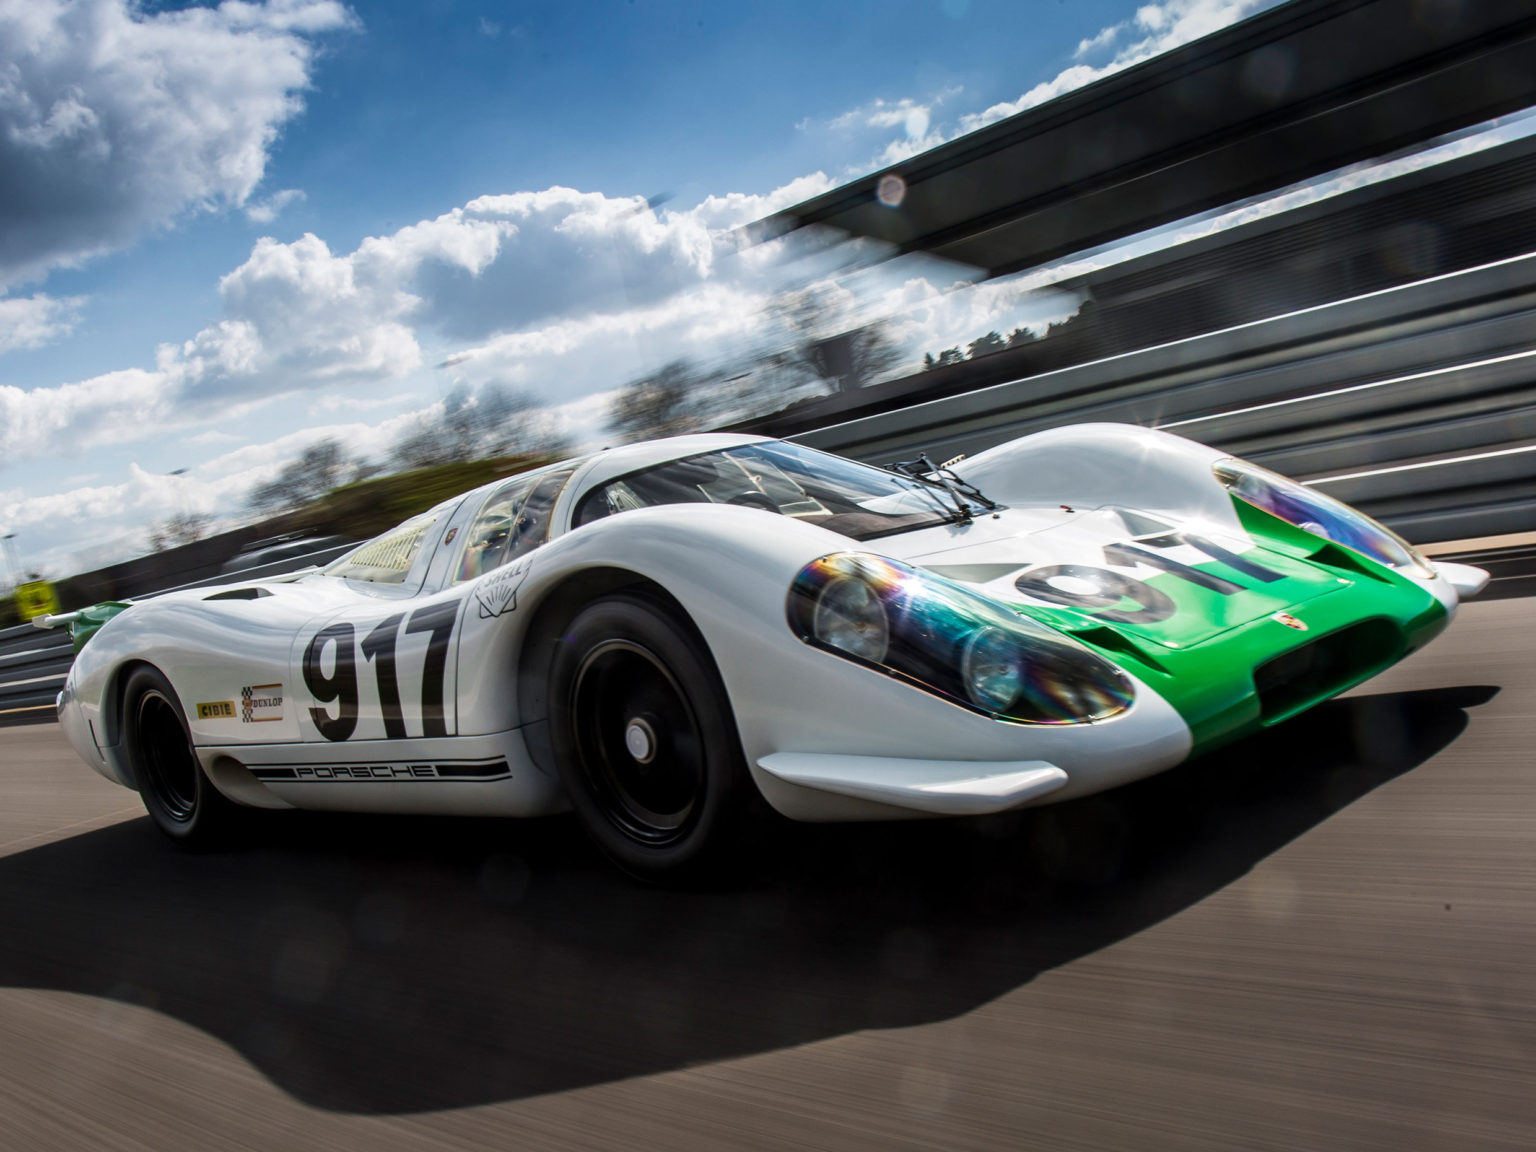 The Porsche 917-001 was restored, and revealed in its original livery 2019.